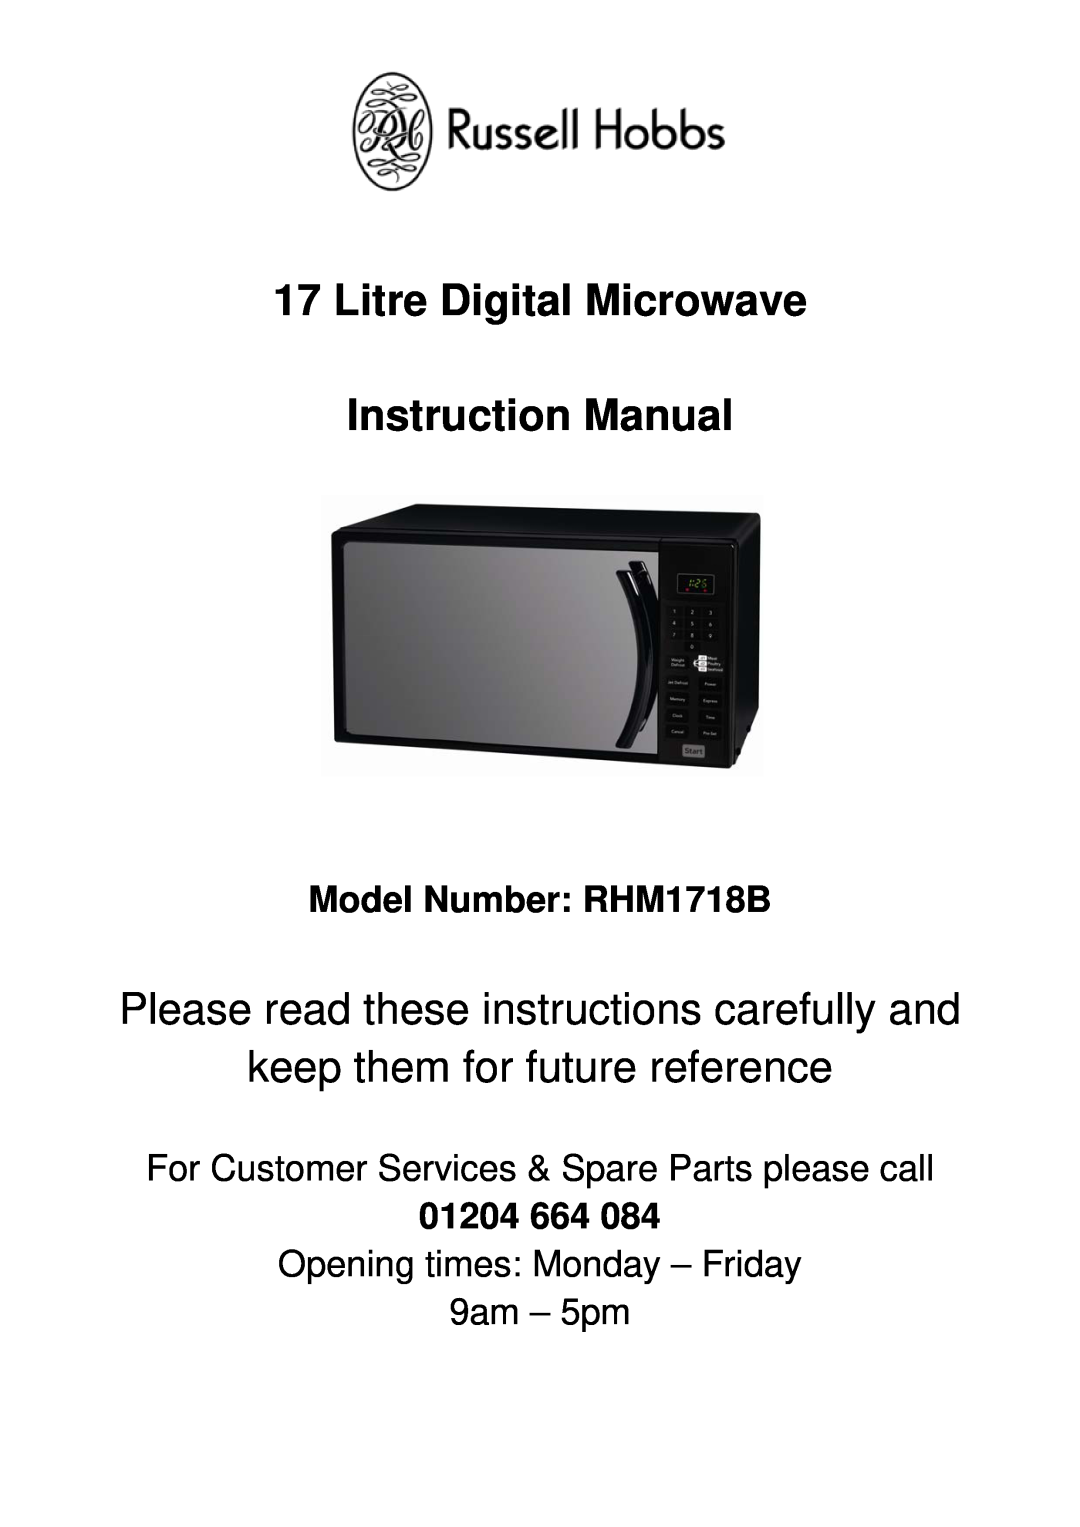 Russell Hobbs RHM1718B instruction manual Please read these instructions carefully and, keep them for future reference 